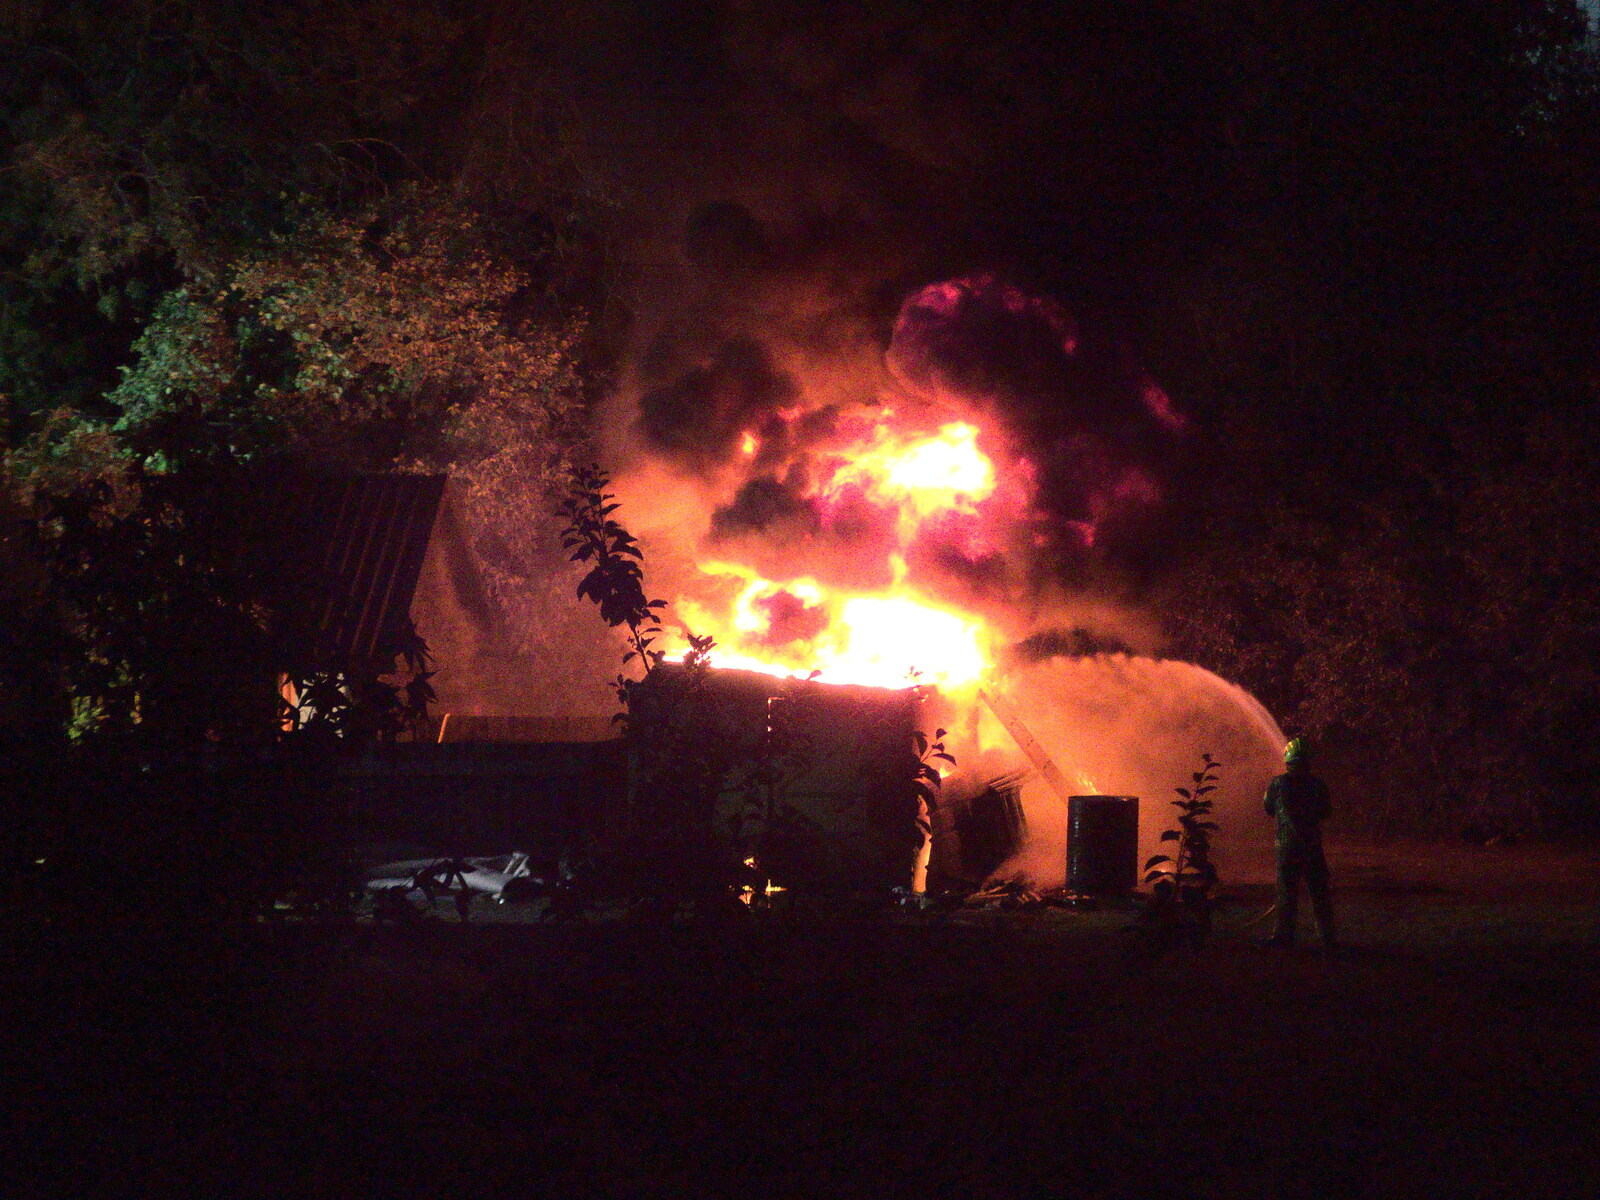 The fire threatens to take out the other shed too from A Fire, a Fête, and a Scout Camp, Hallowtree, Suffolk - 30th June 2022